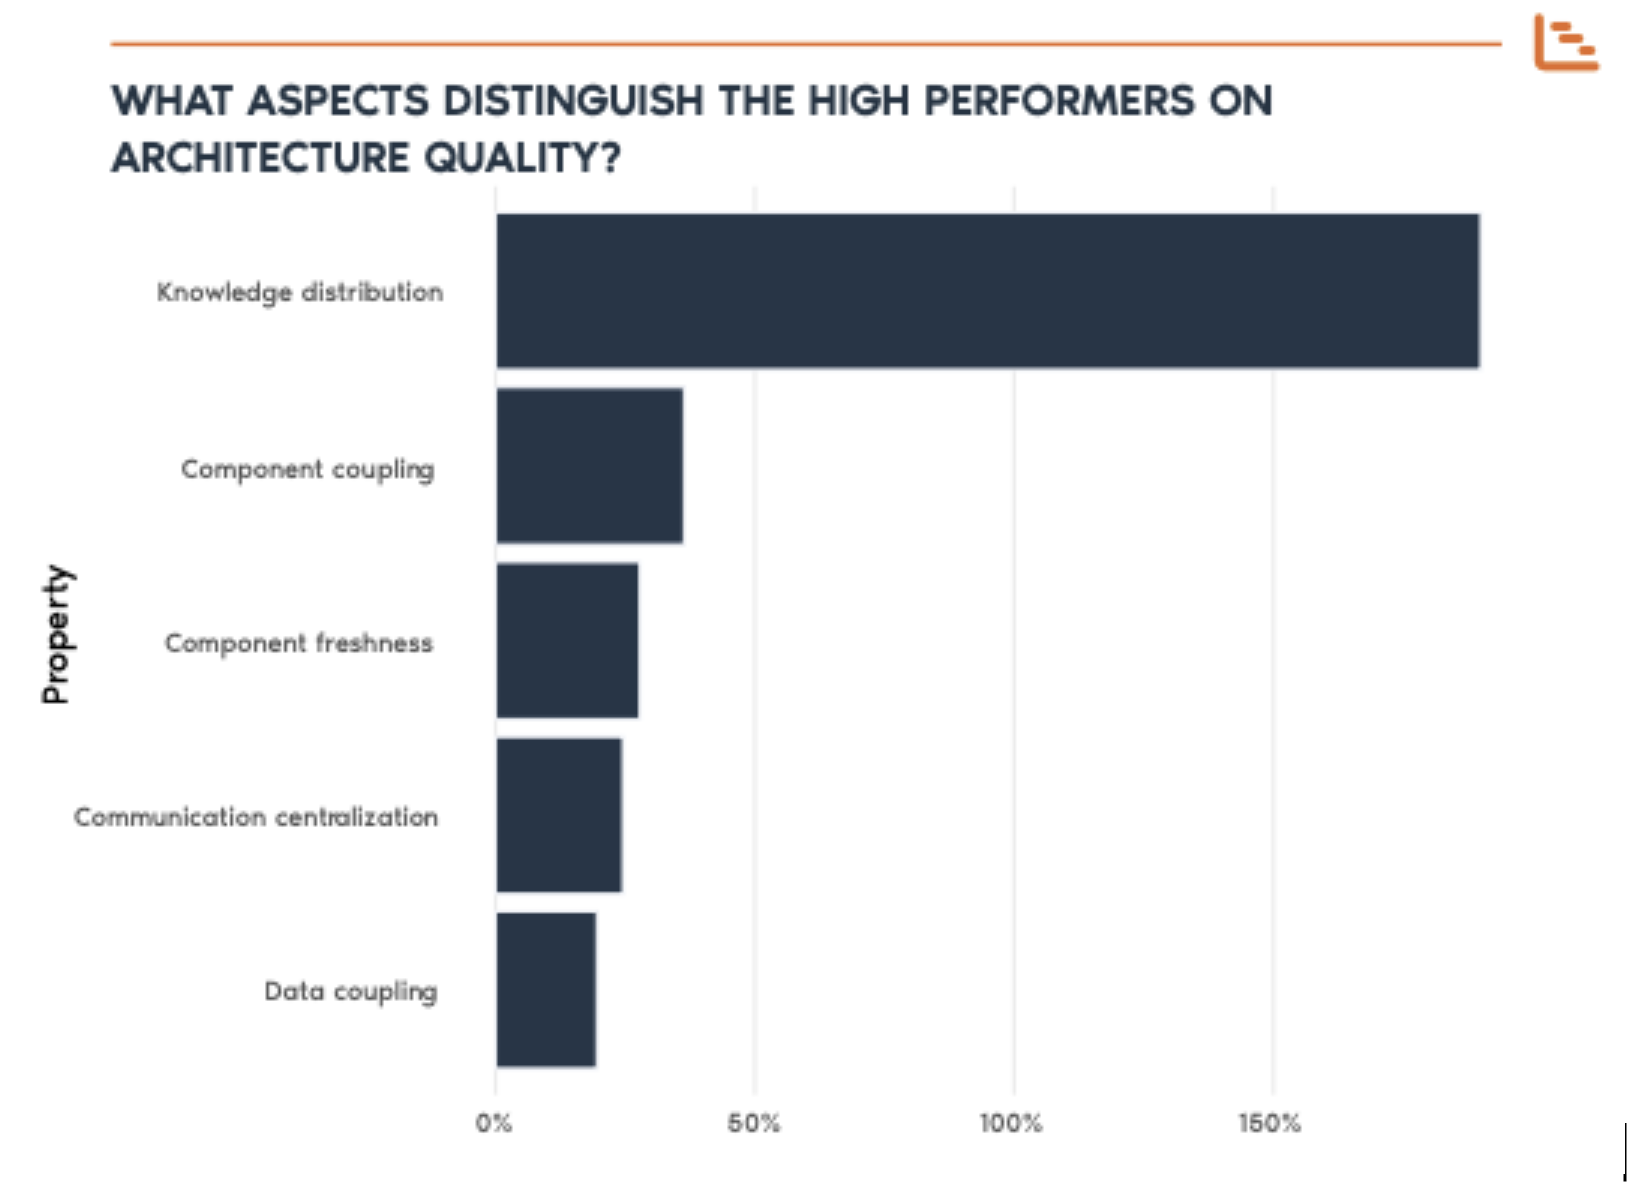 What aspects distinguish the high performers on architecture quality